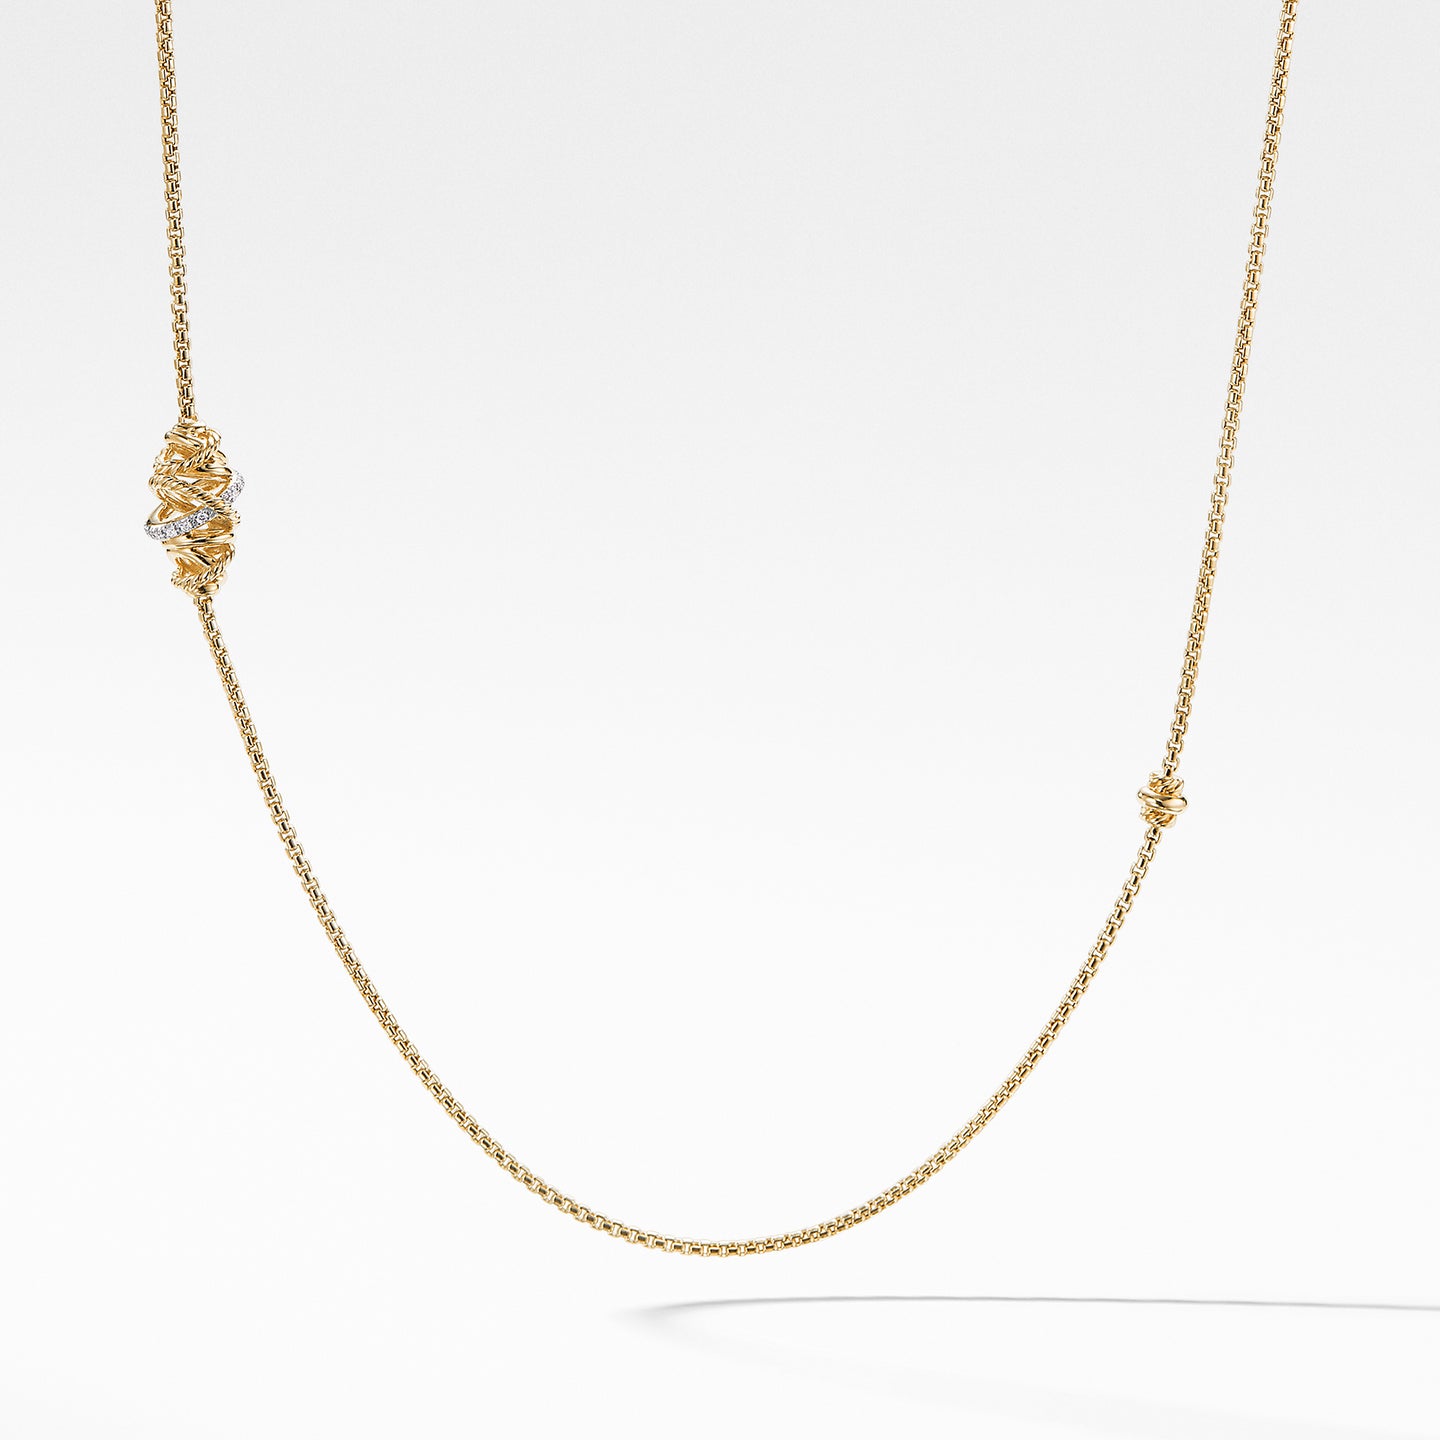 Crossover Station Necklace with Diamonds in 18K Gold, 36